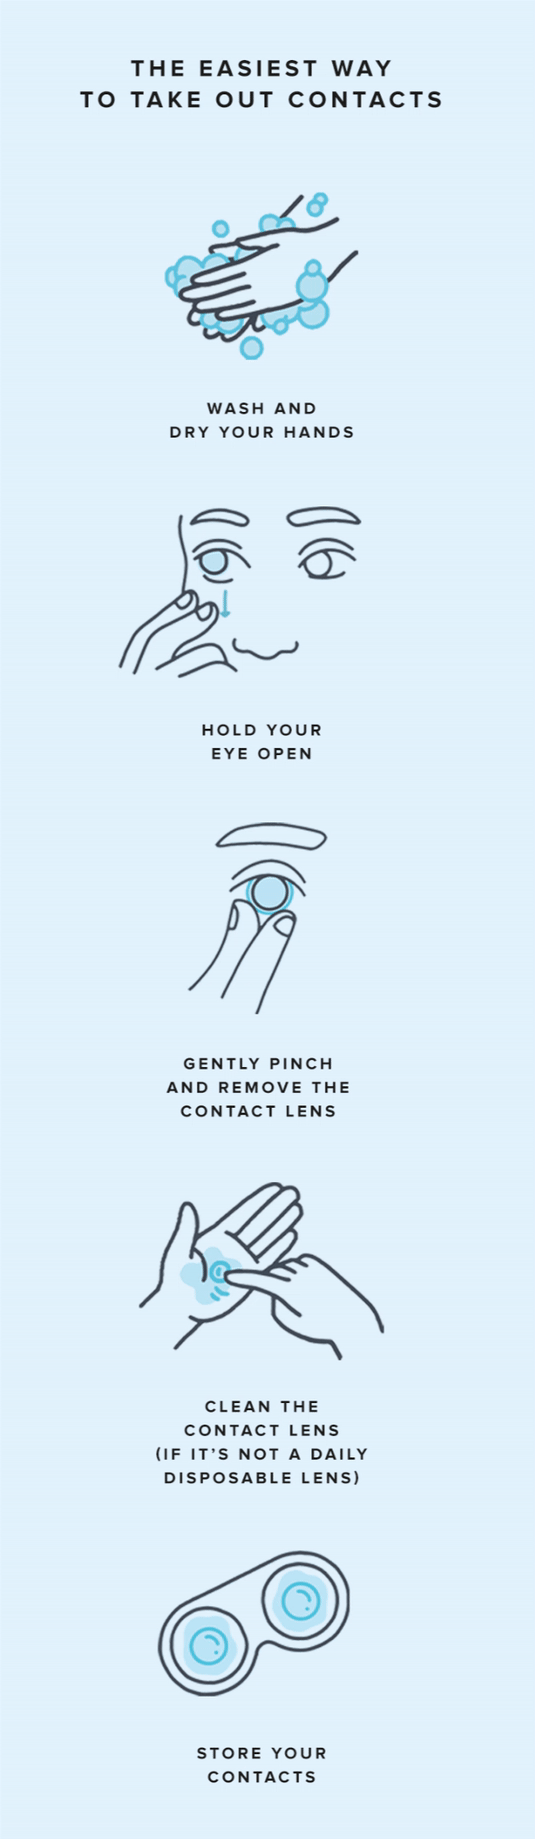 How to Take Out Contacts | Warby Parker